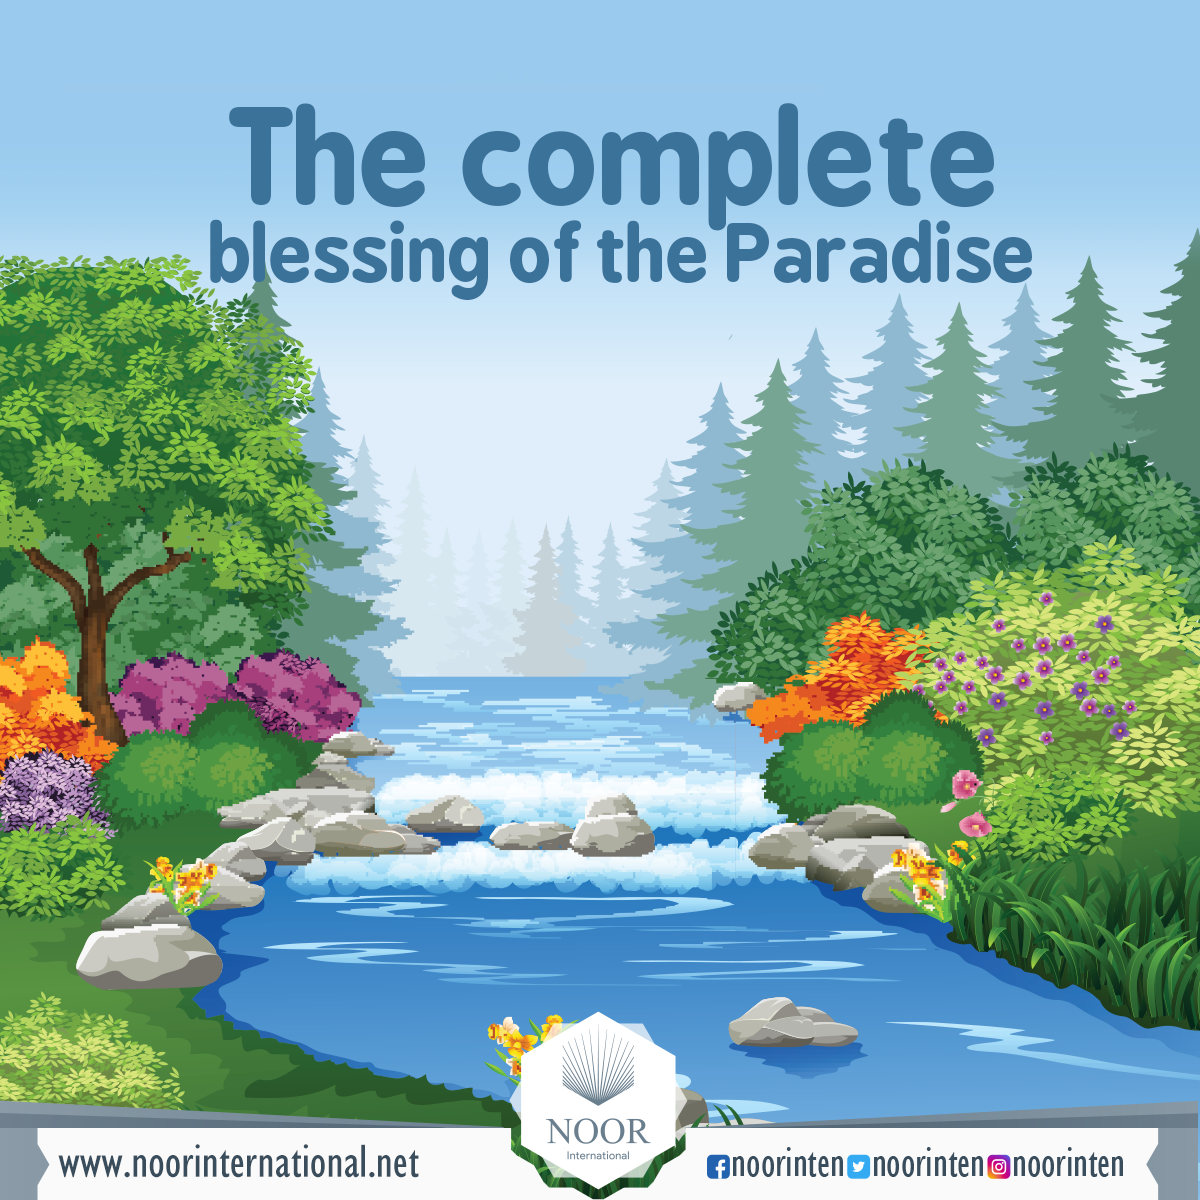 The complete blessing of the Paradise